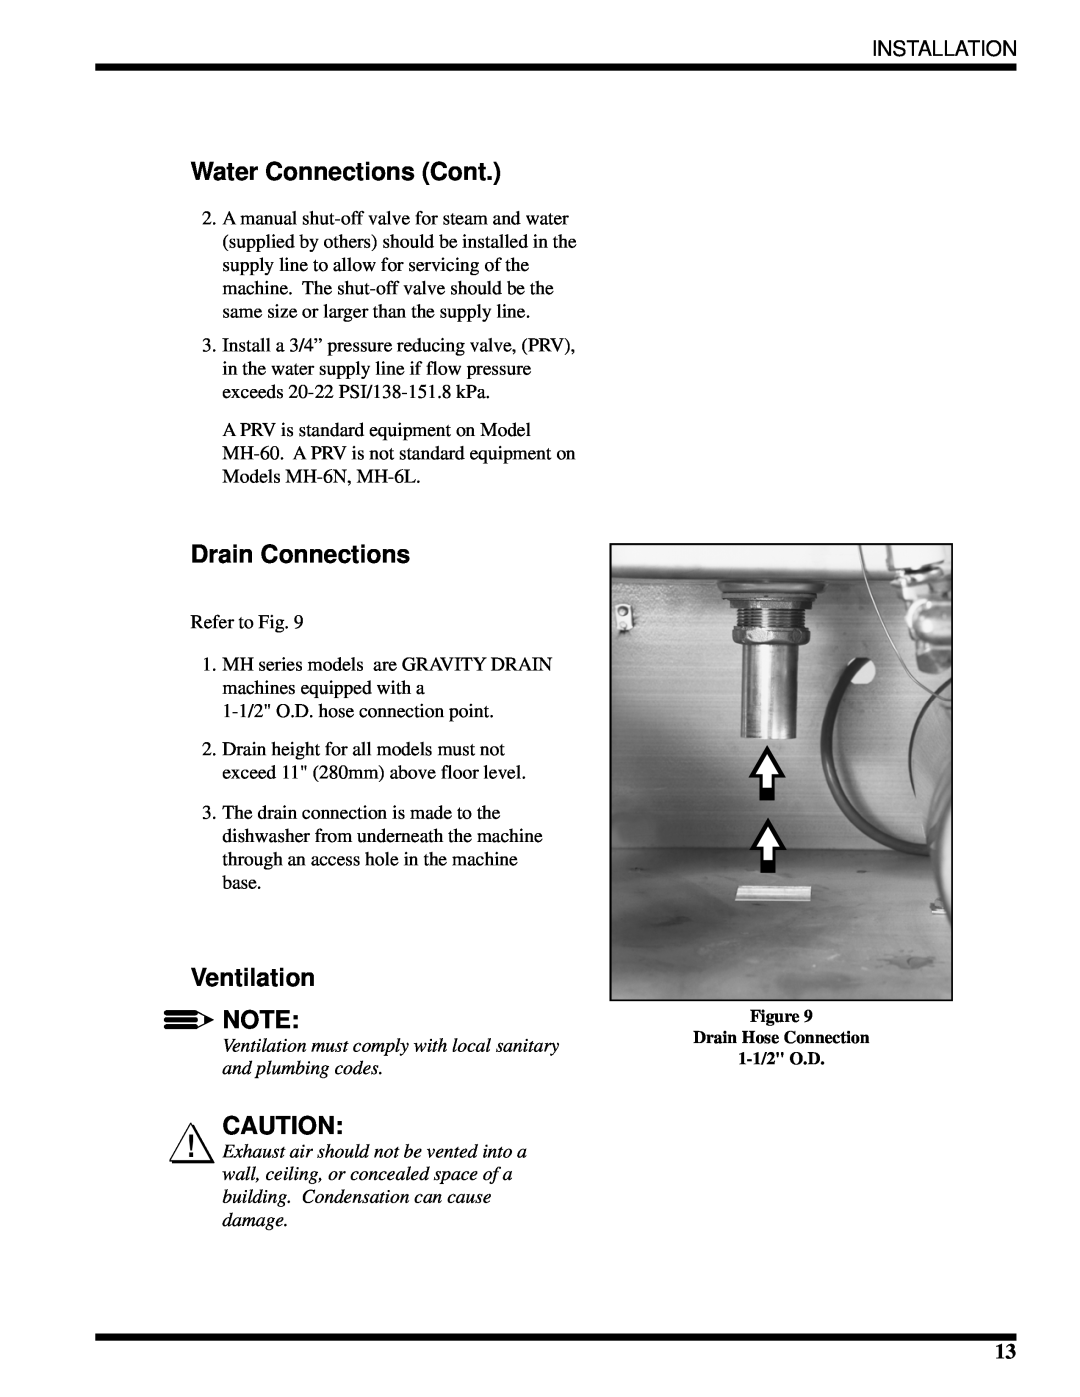 Moyer Diebel MH-6NM2, MH-60M2, MH-6LM2 technical manual Water Connections Cont, Drain Connections, Ventilation, Installation 